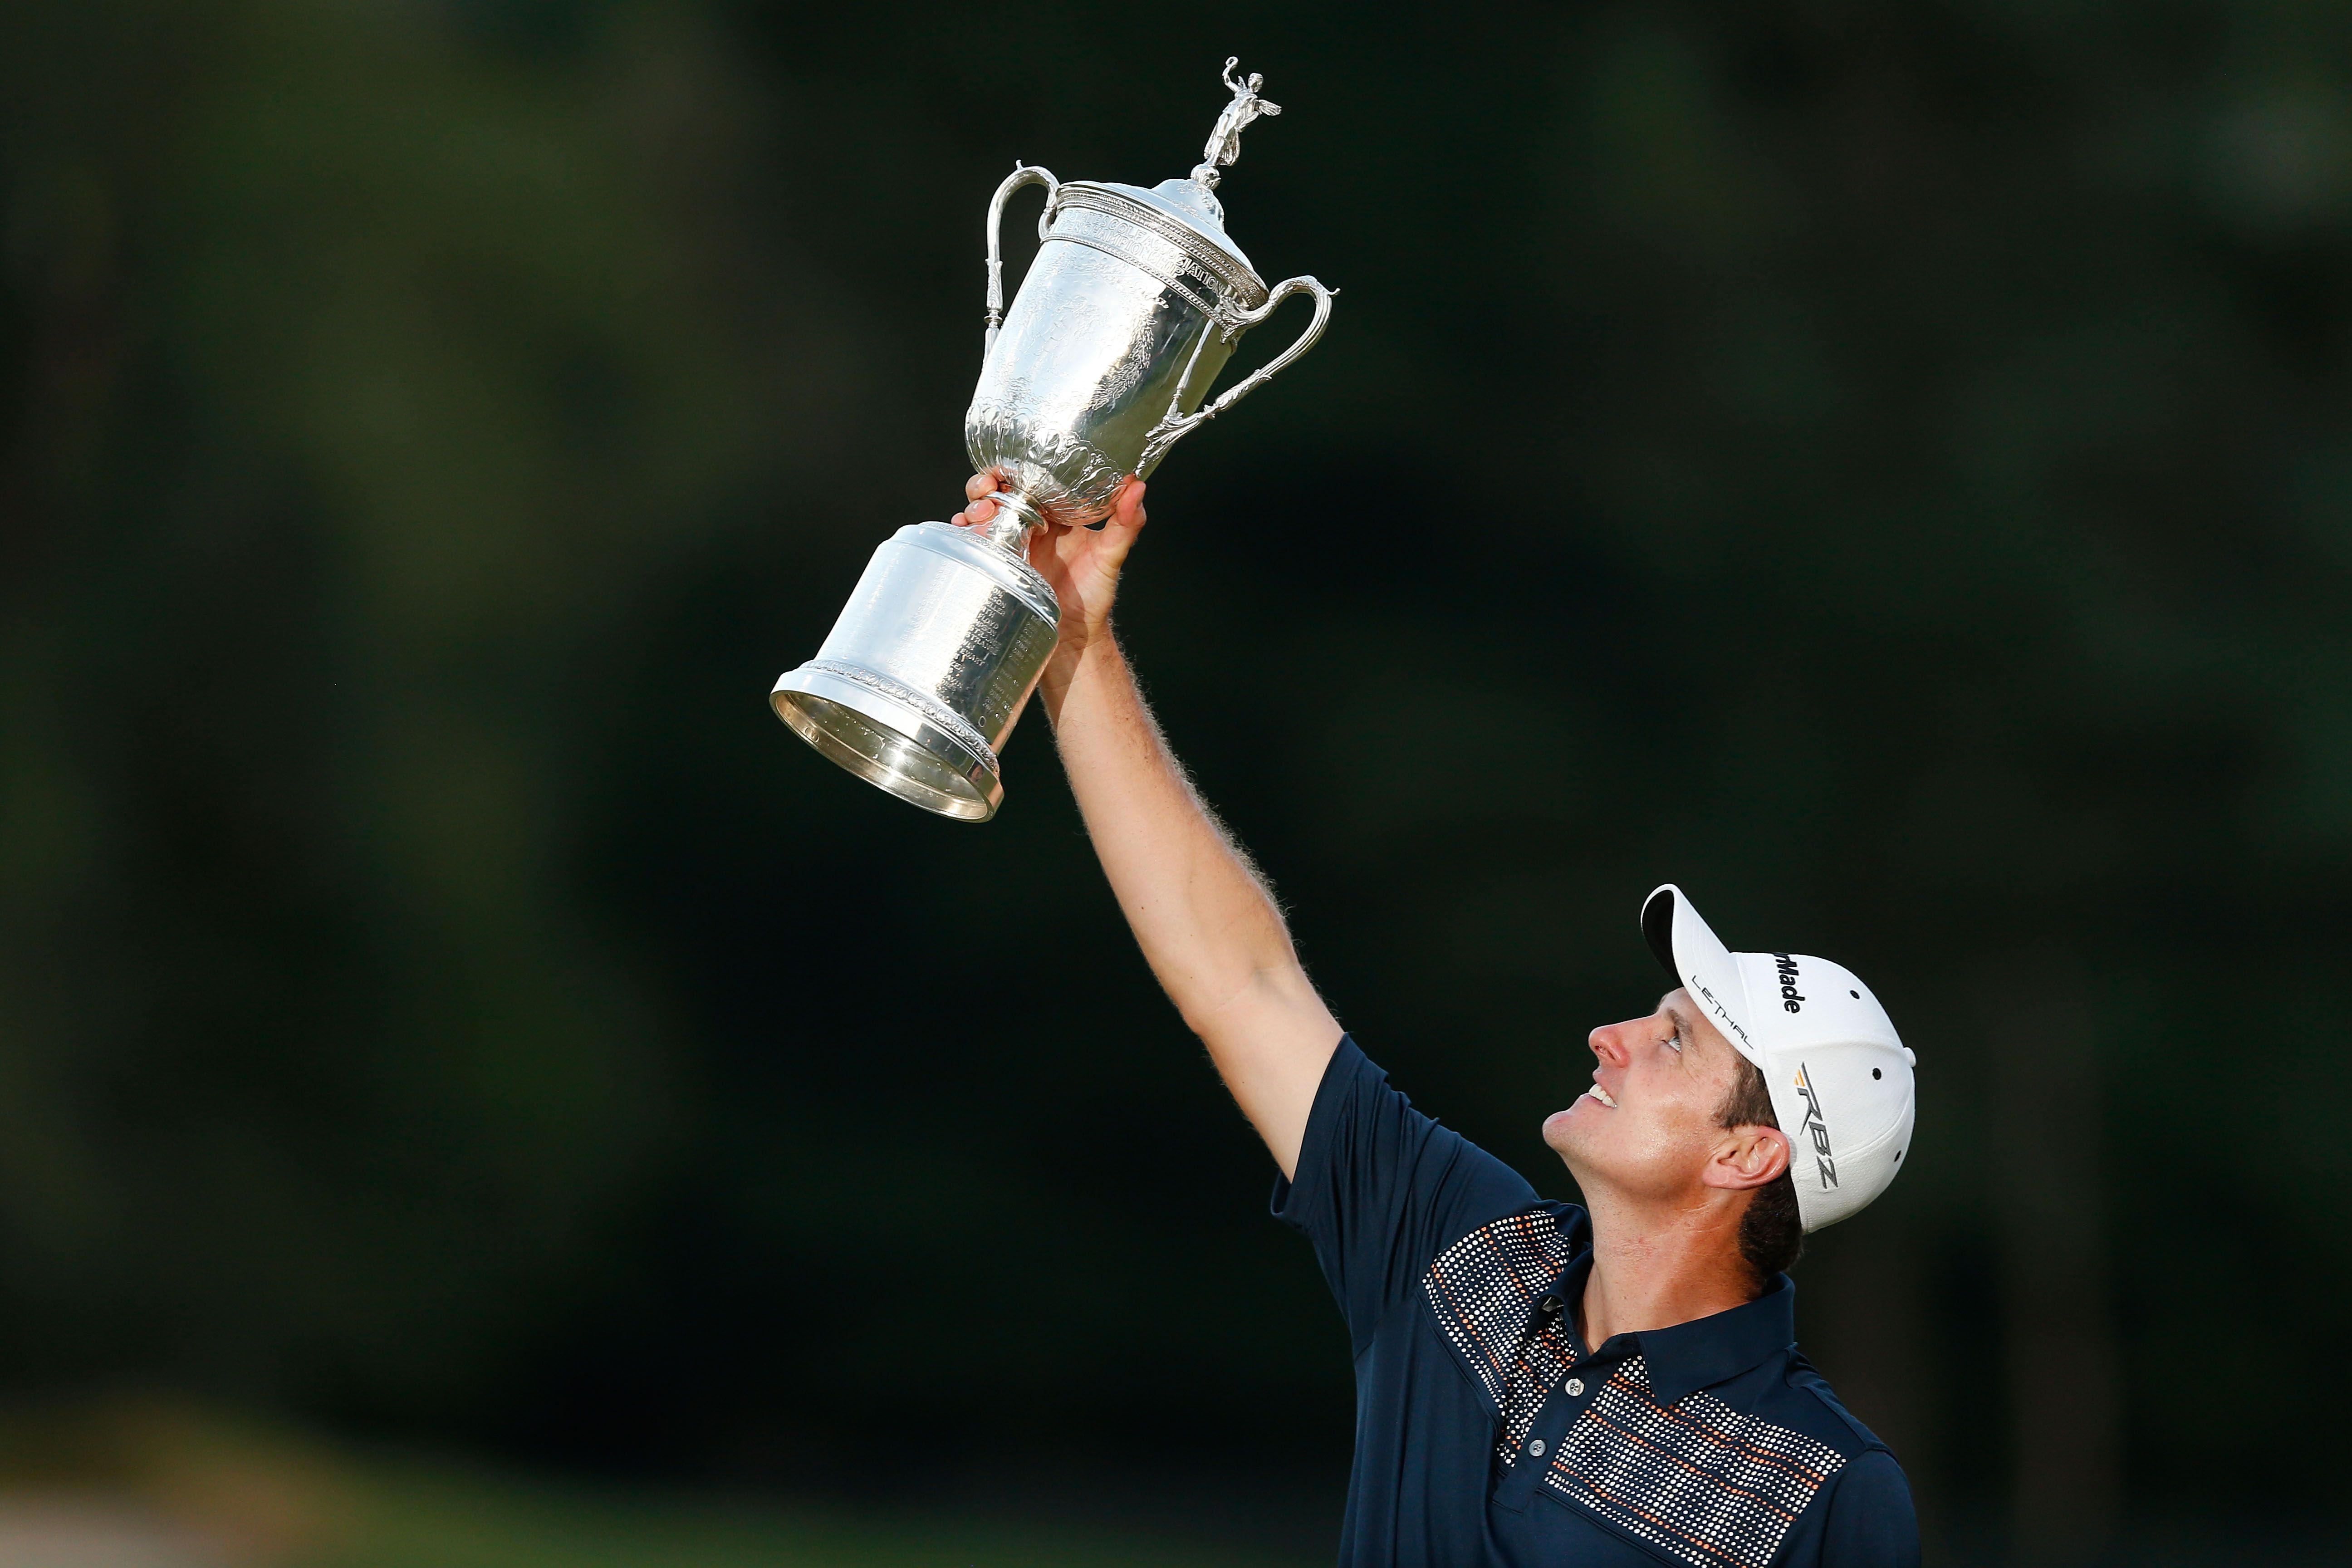 US Open Golf Tournament (Facts, History, Lists, Trivia)